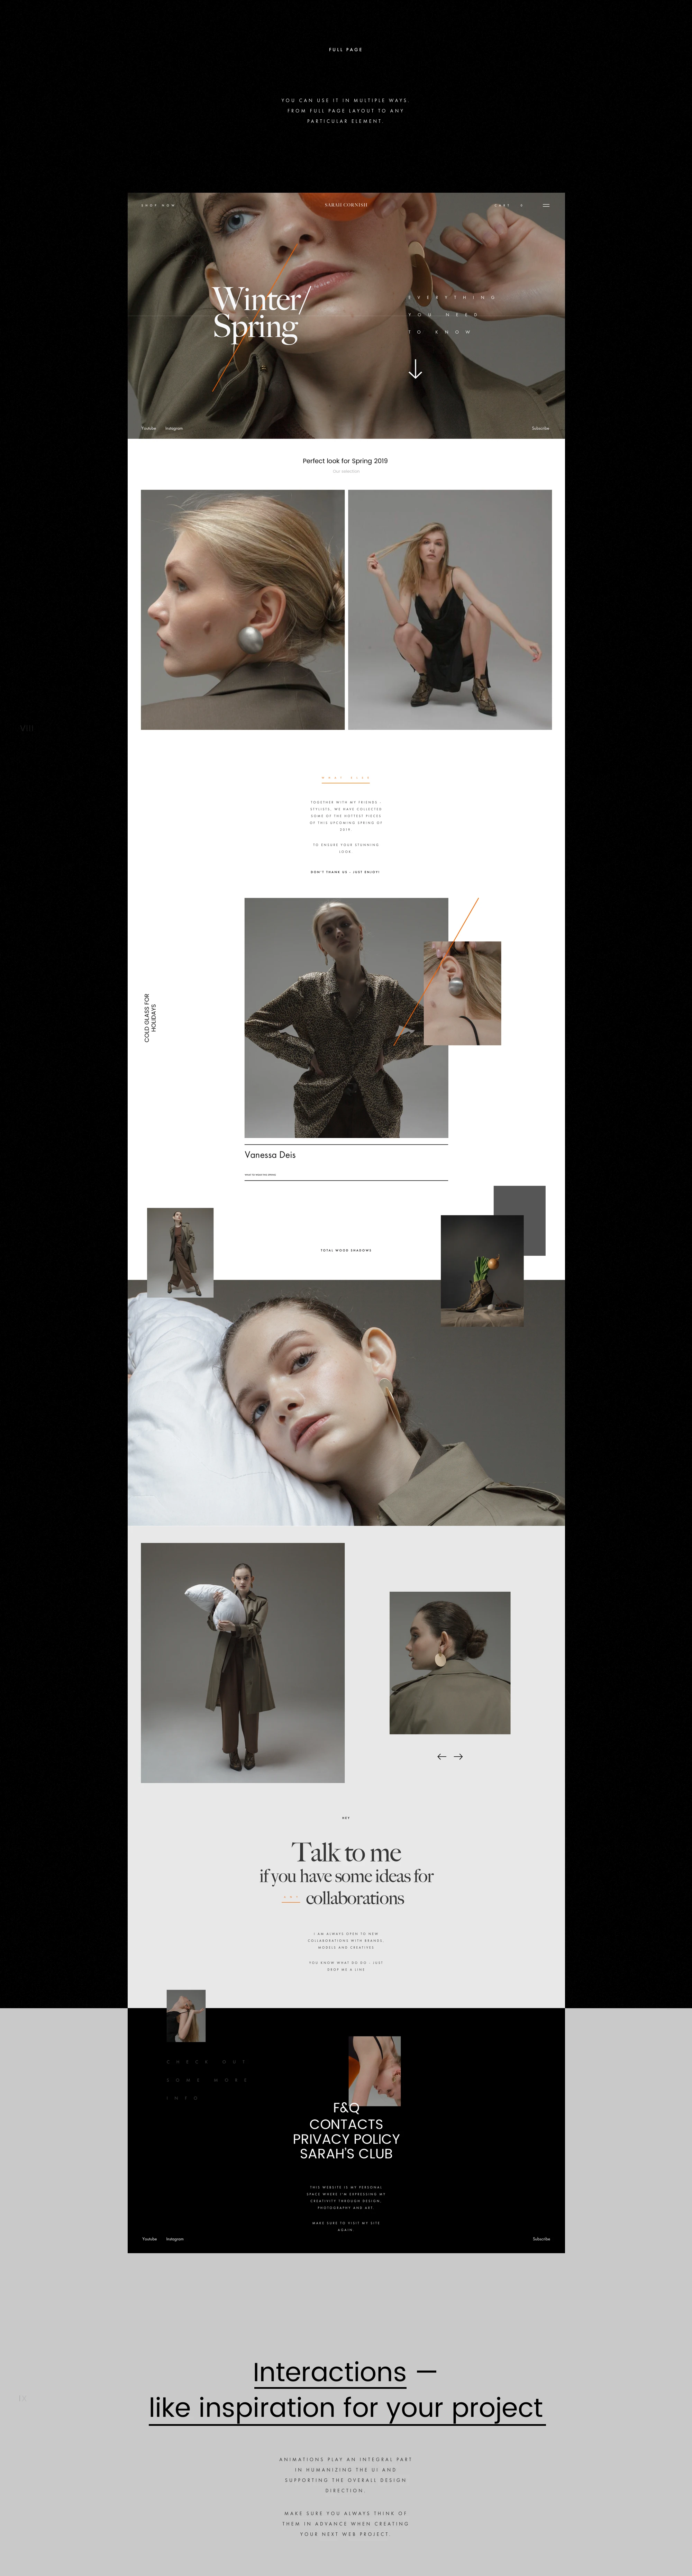 Fashion Influencer UI Kit for Adobe XD - The UI Kit itself is #MadeInAdobeXD and is available for free. It features a ton of goodies for you to use in your next design projects! Don't miss out!